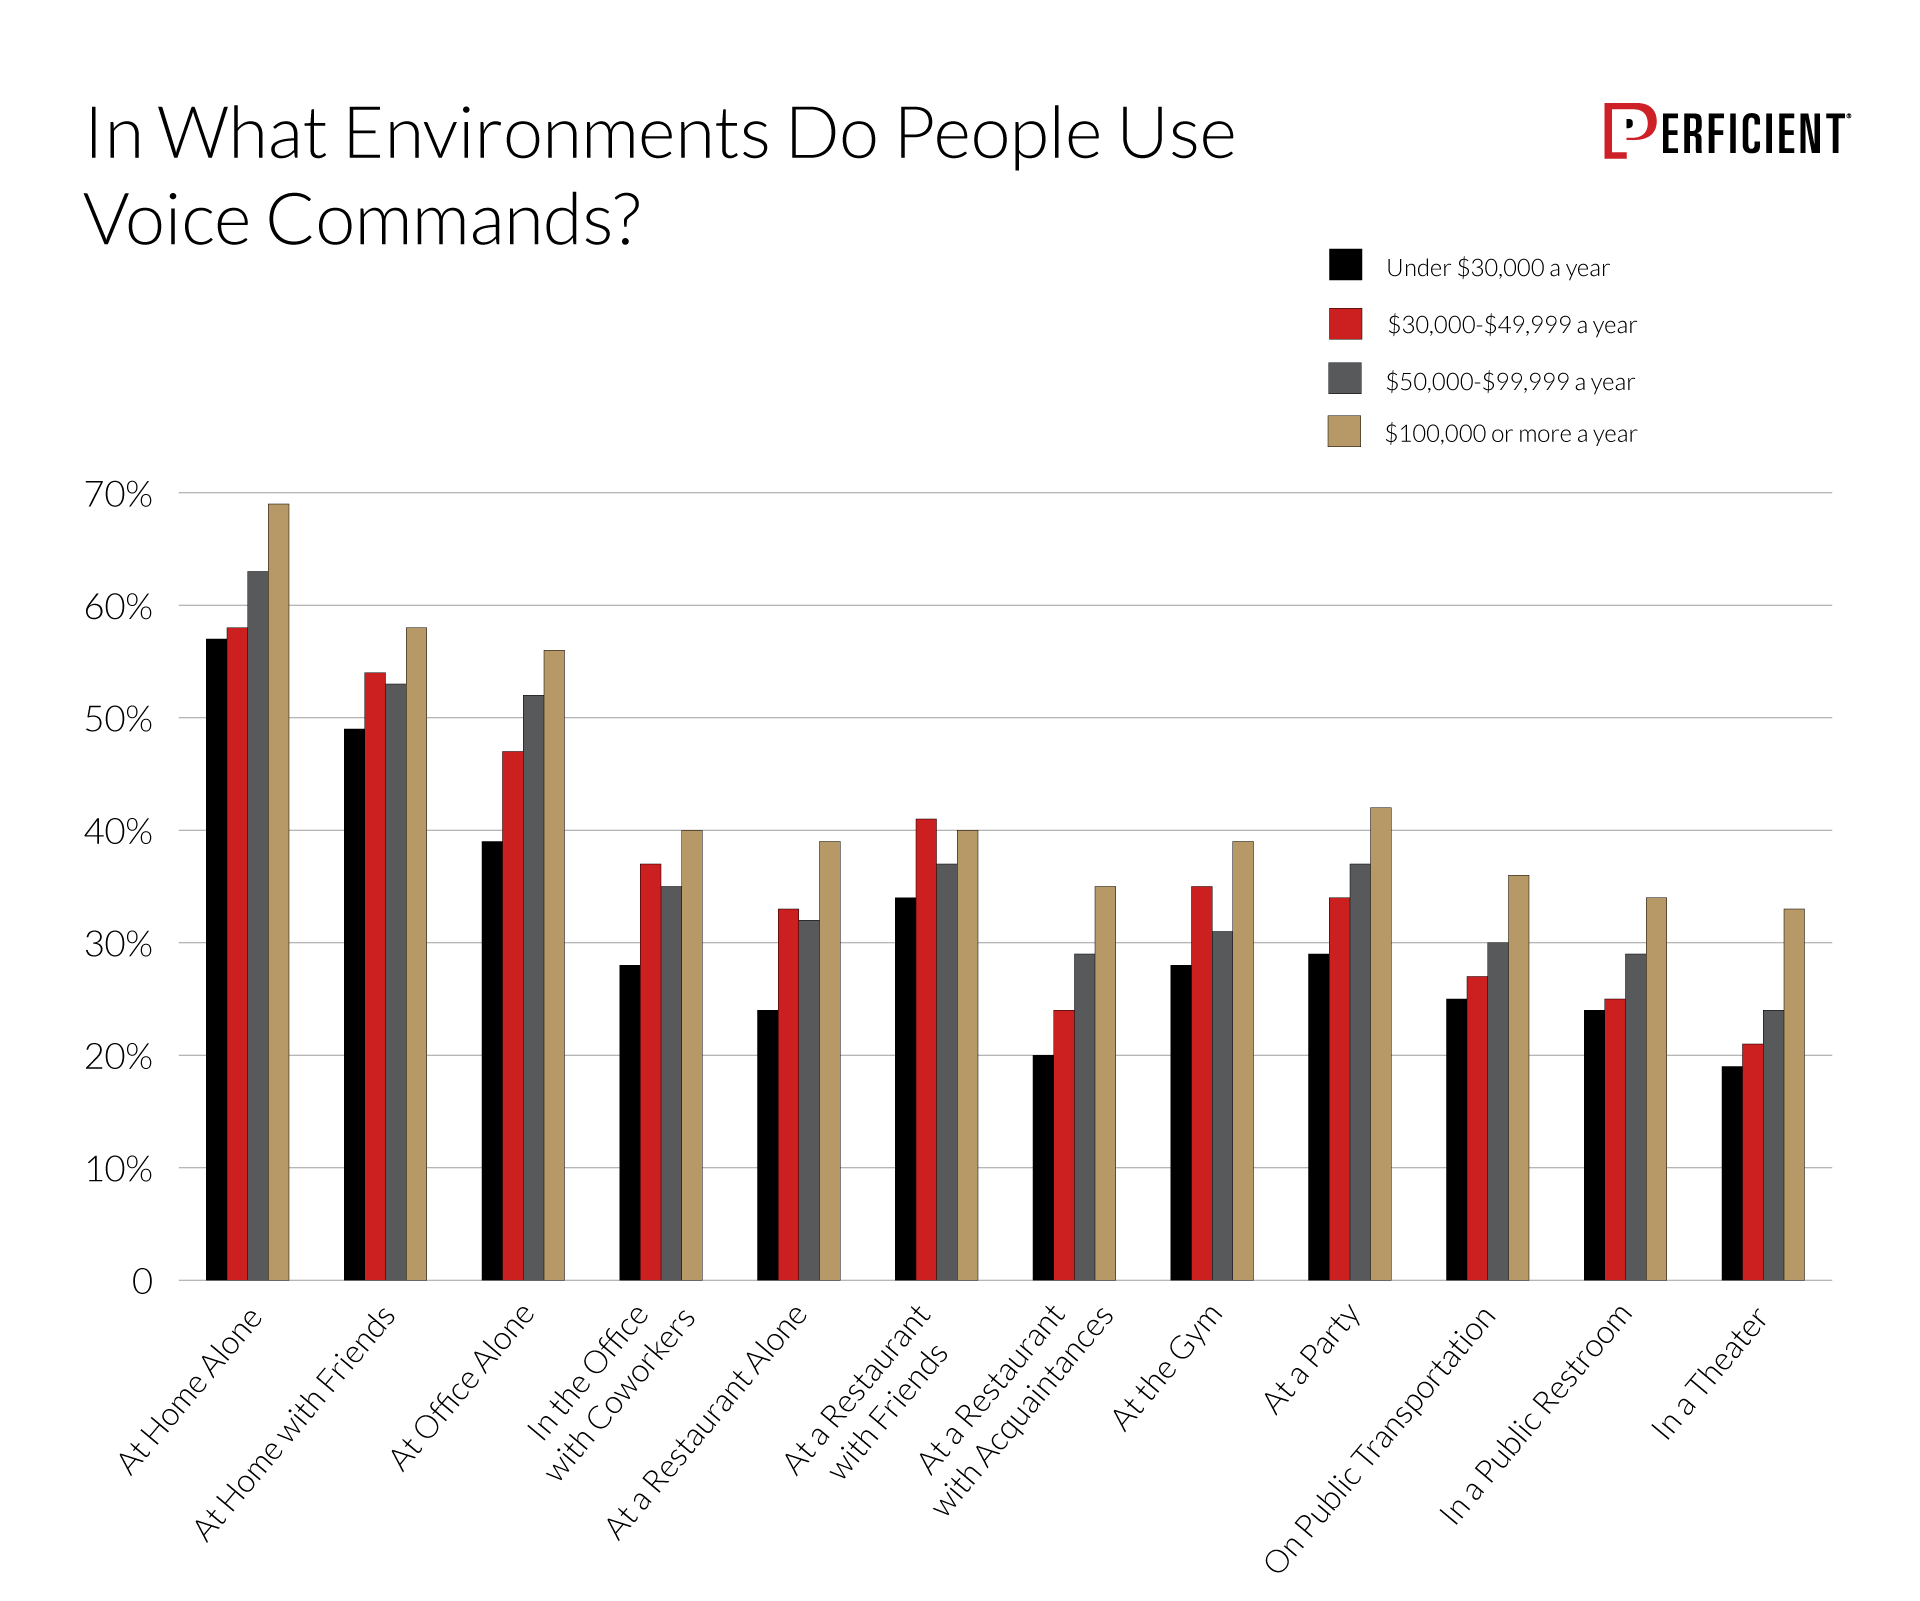 How likely people would use voice commands in different environments by income group